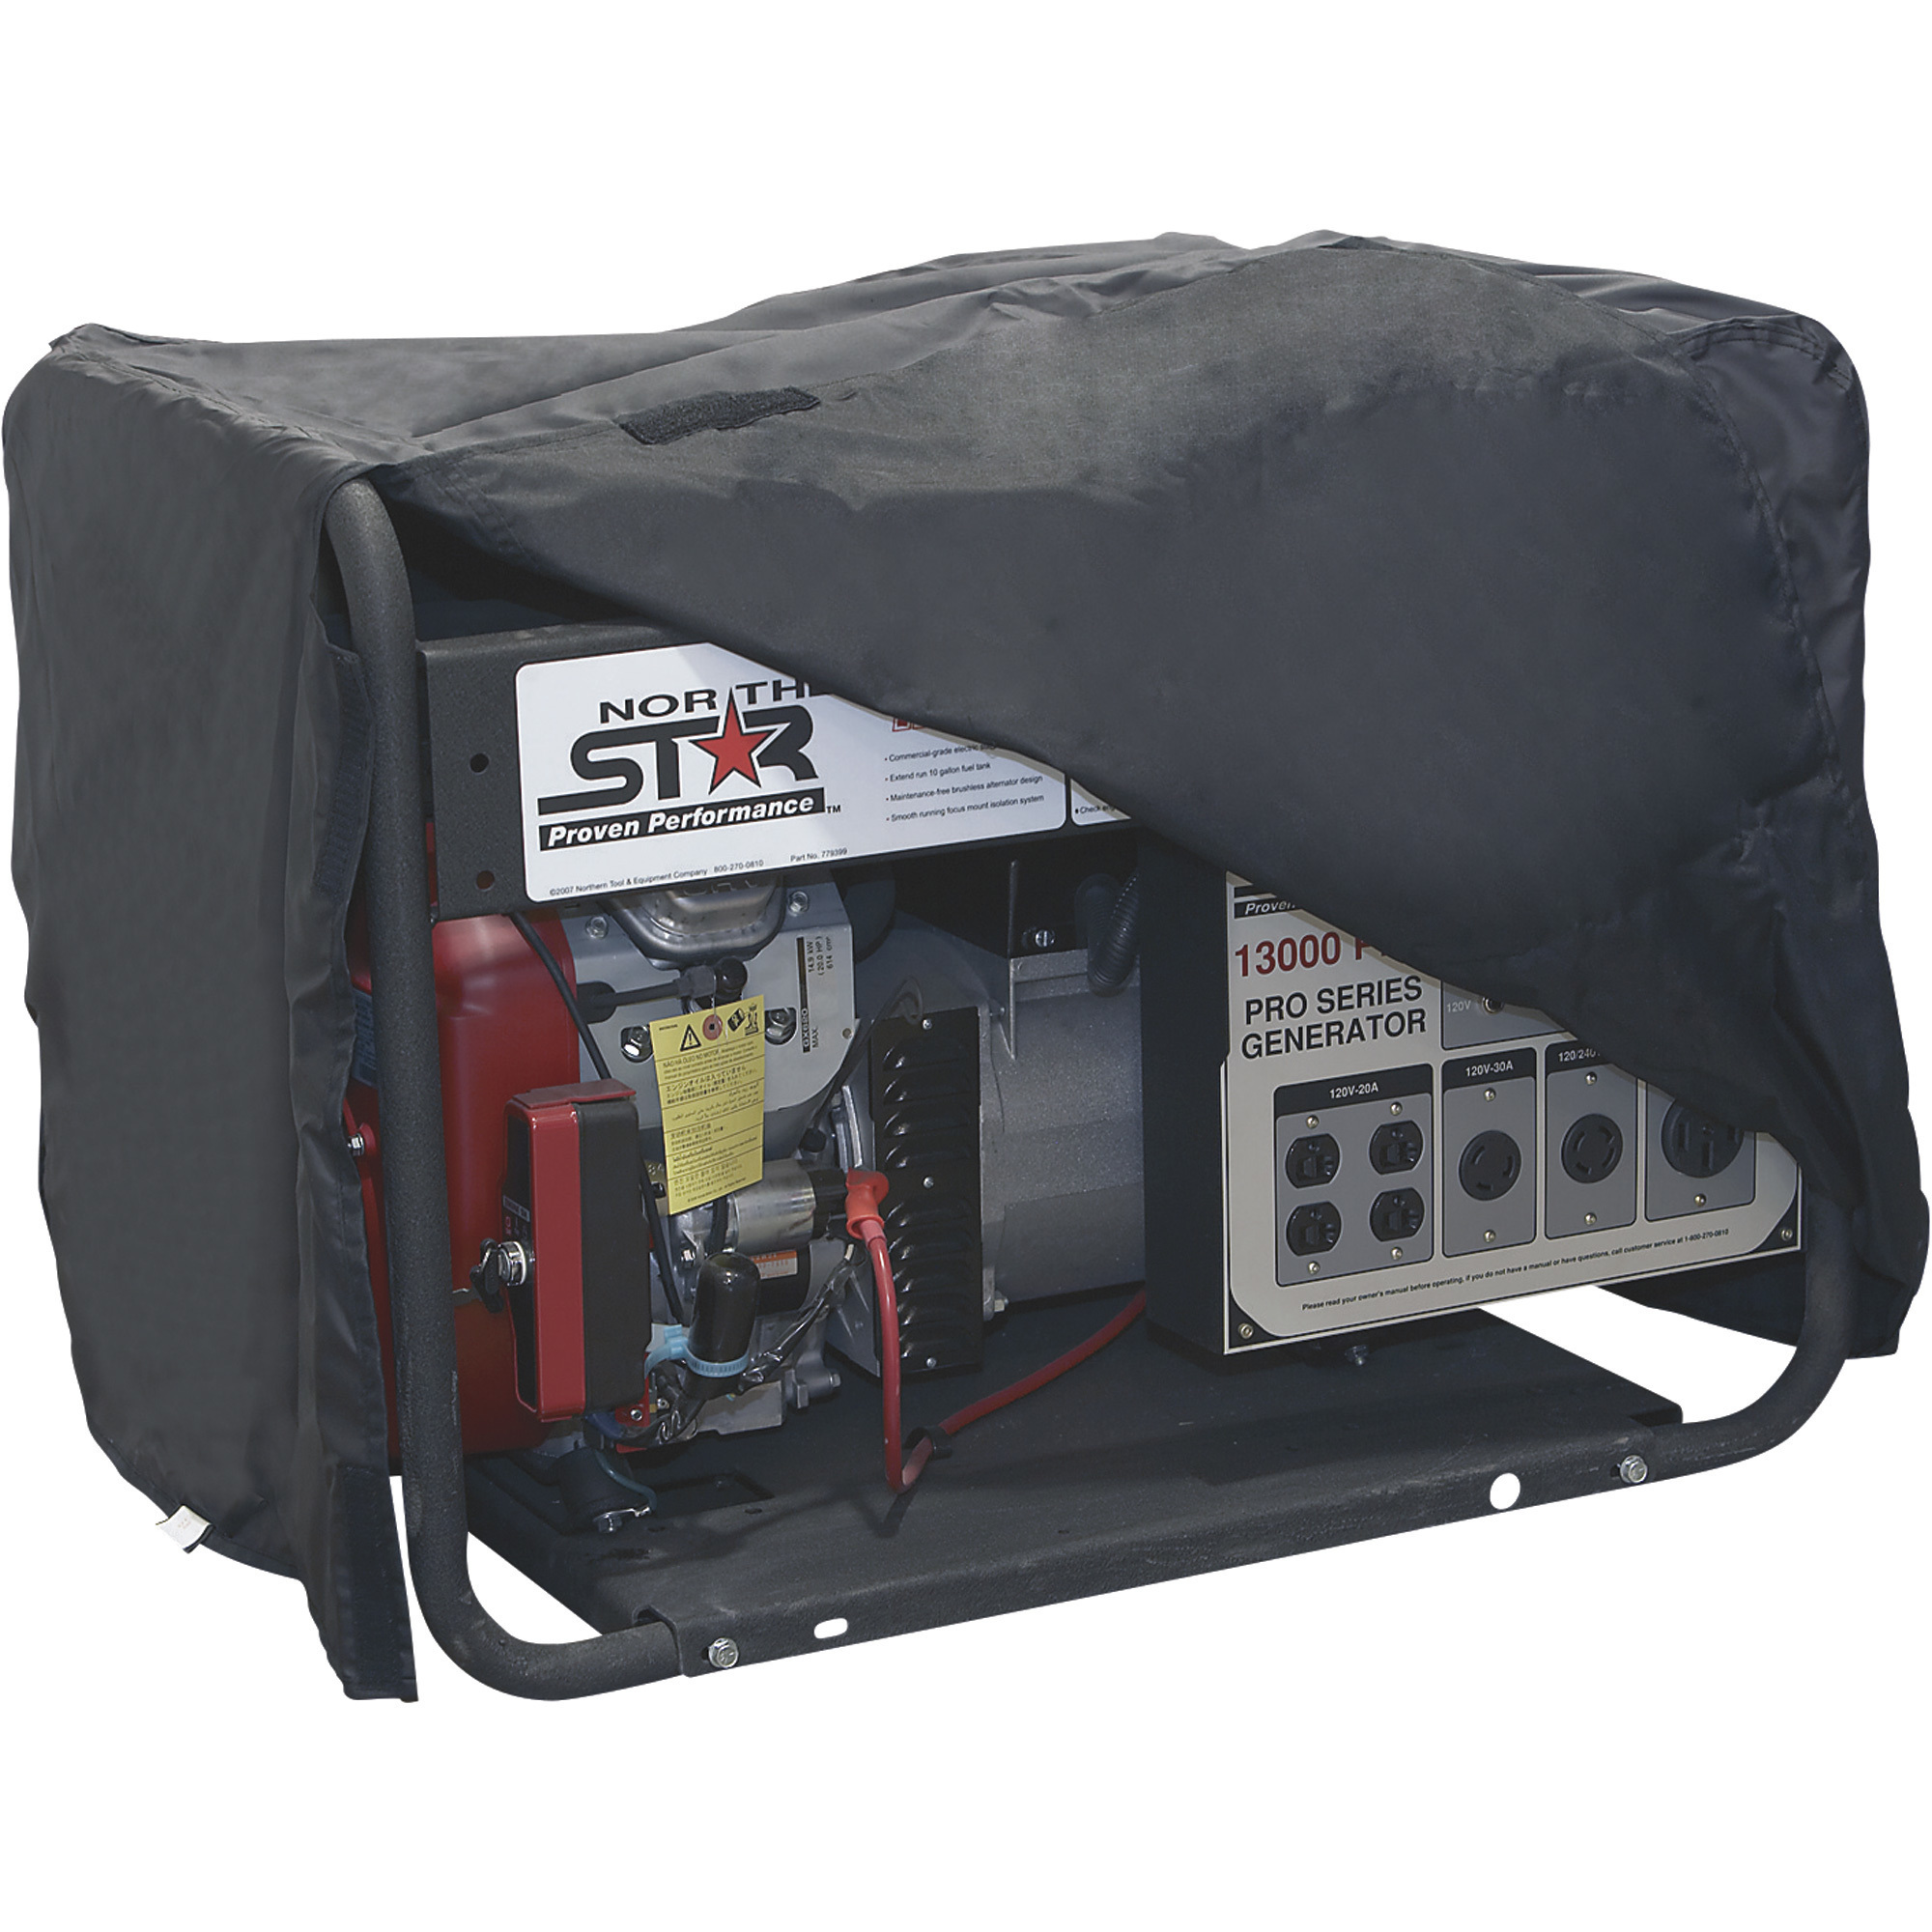 Classic Accessories Generator Cover, Large, Black, Fits Generators Up To 7,000 Watts, Model 79537